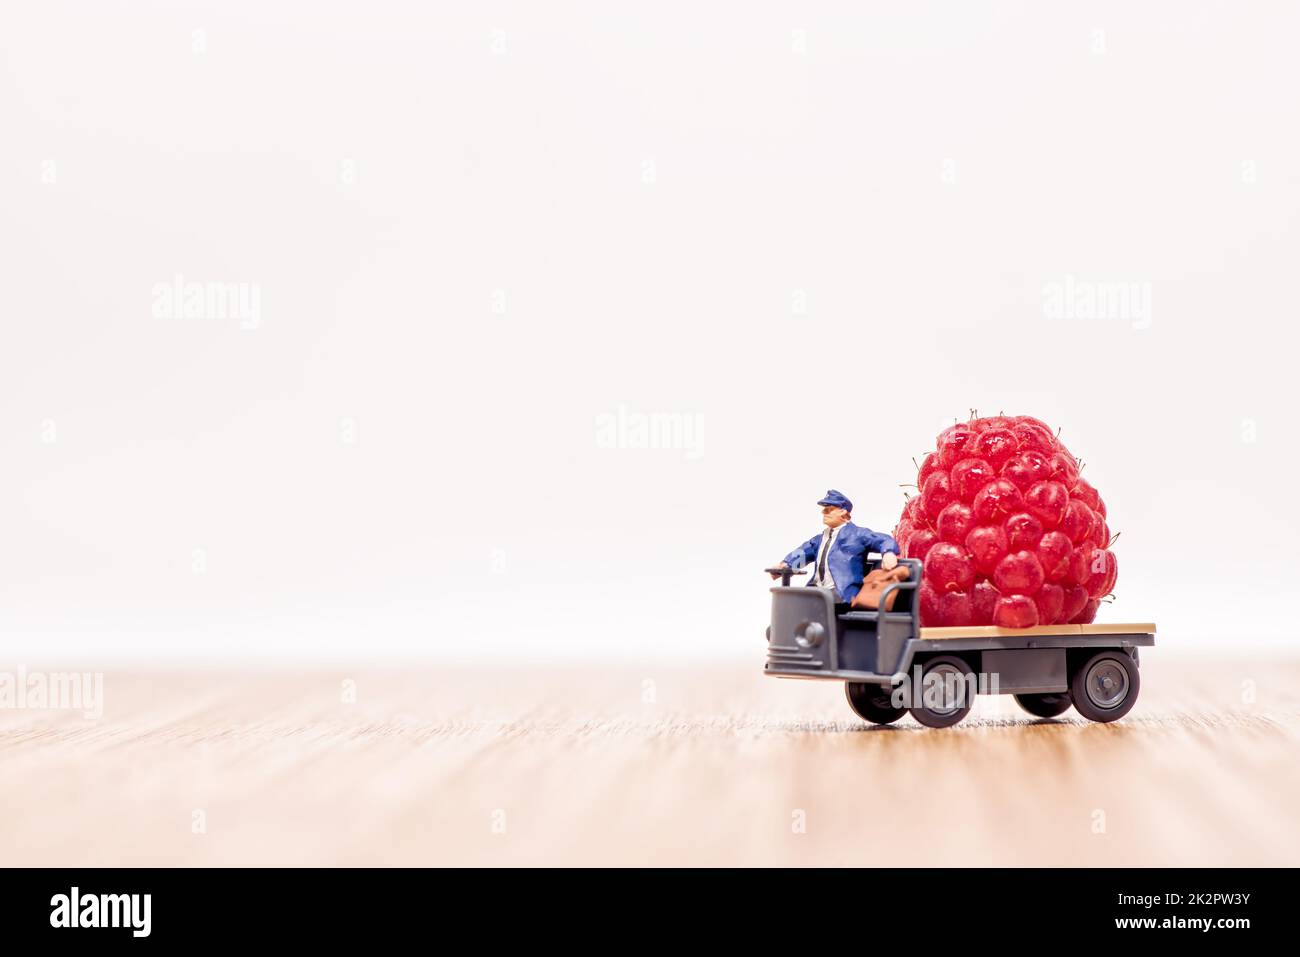 Miniature lorry loaded with giant raspberry. Fruit delivery concept Stock Photo